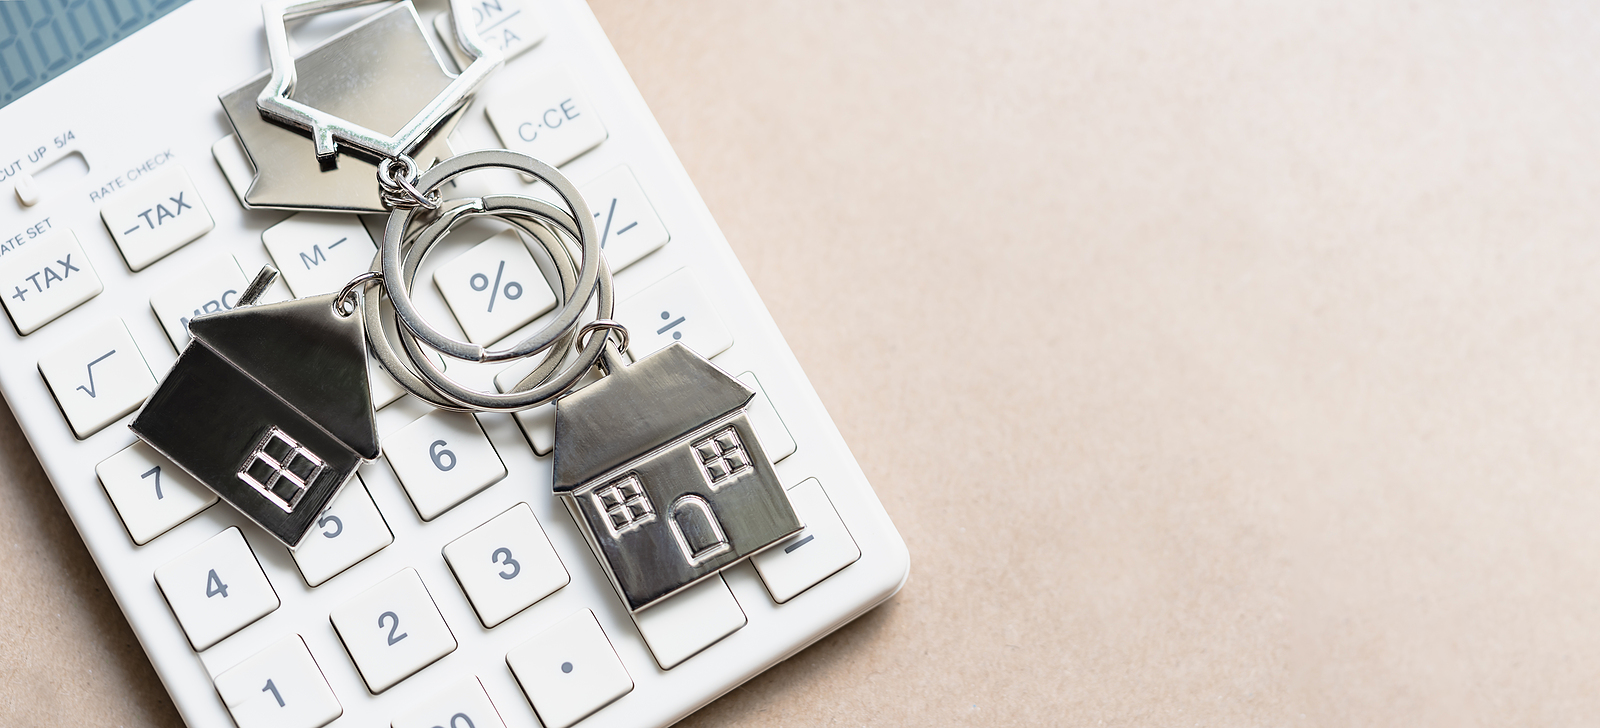 keys to a new home on a calculator